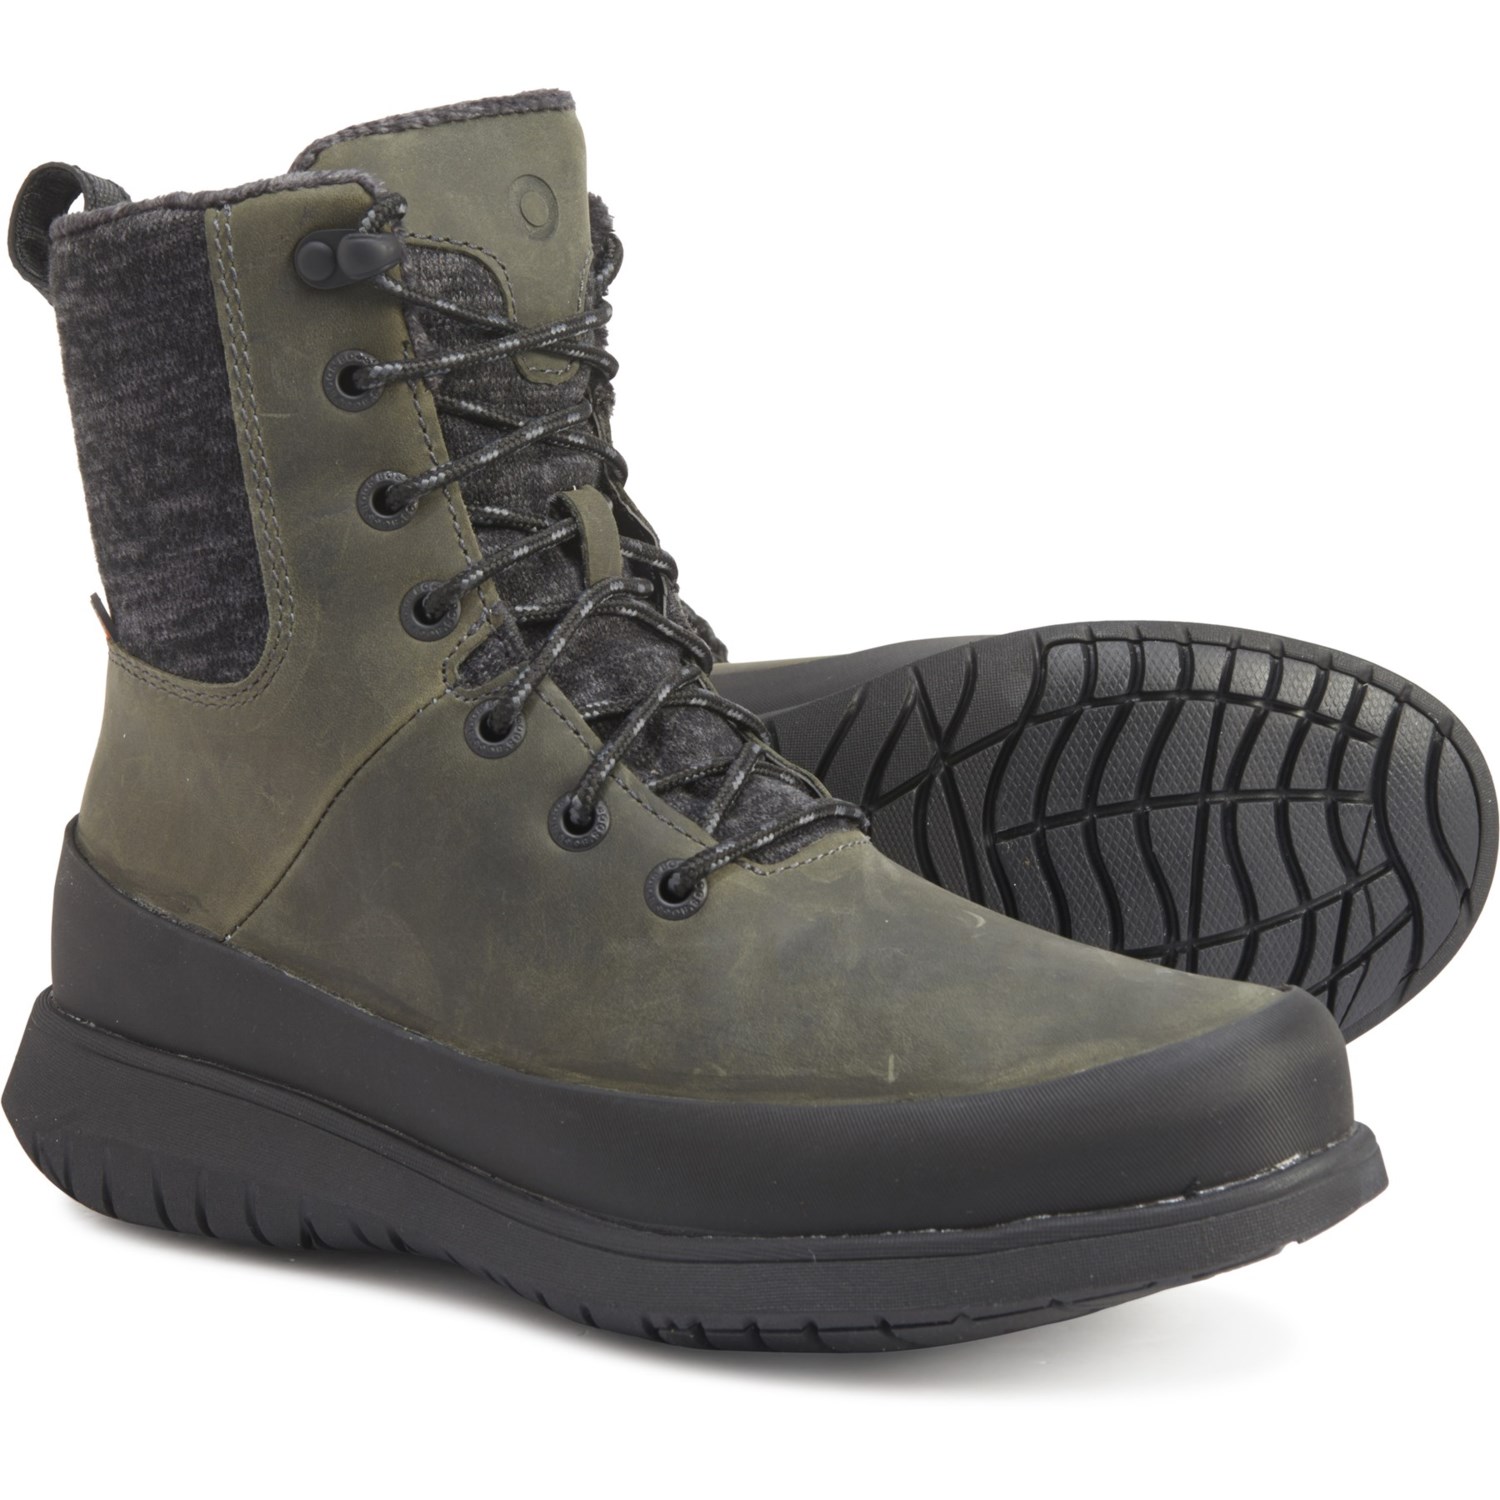 bogs boots womens